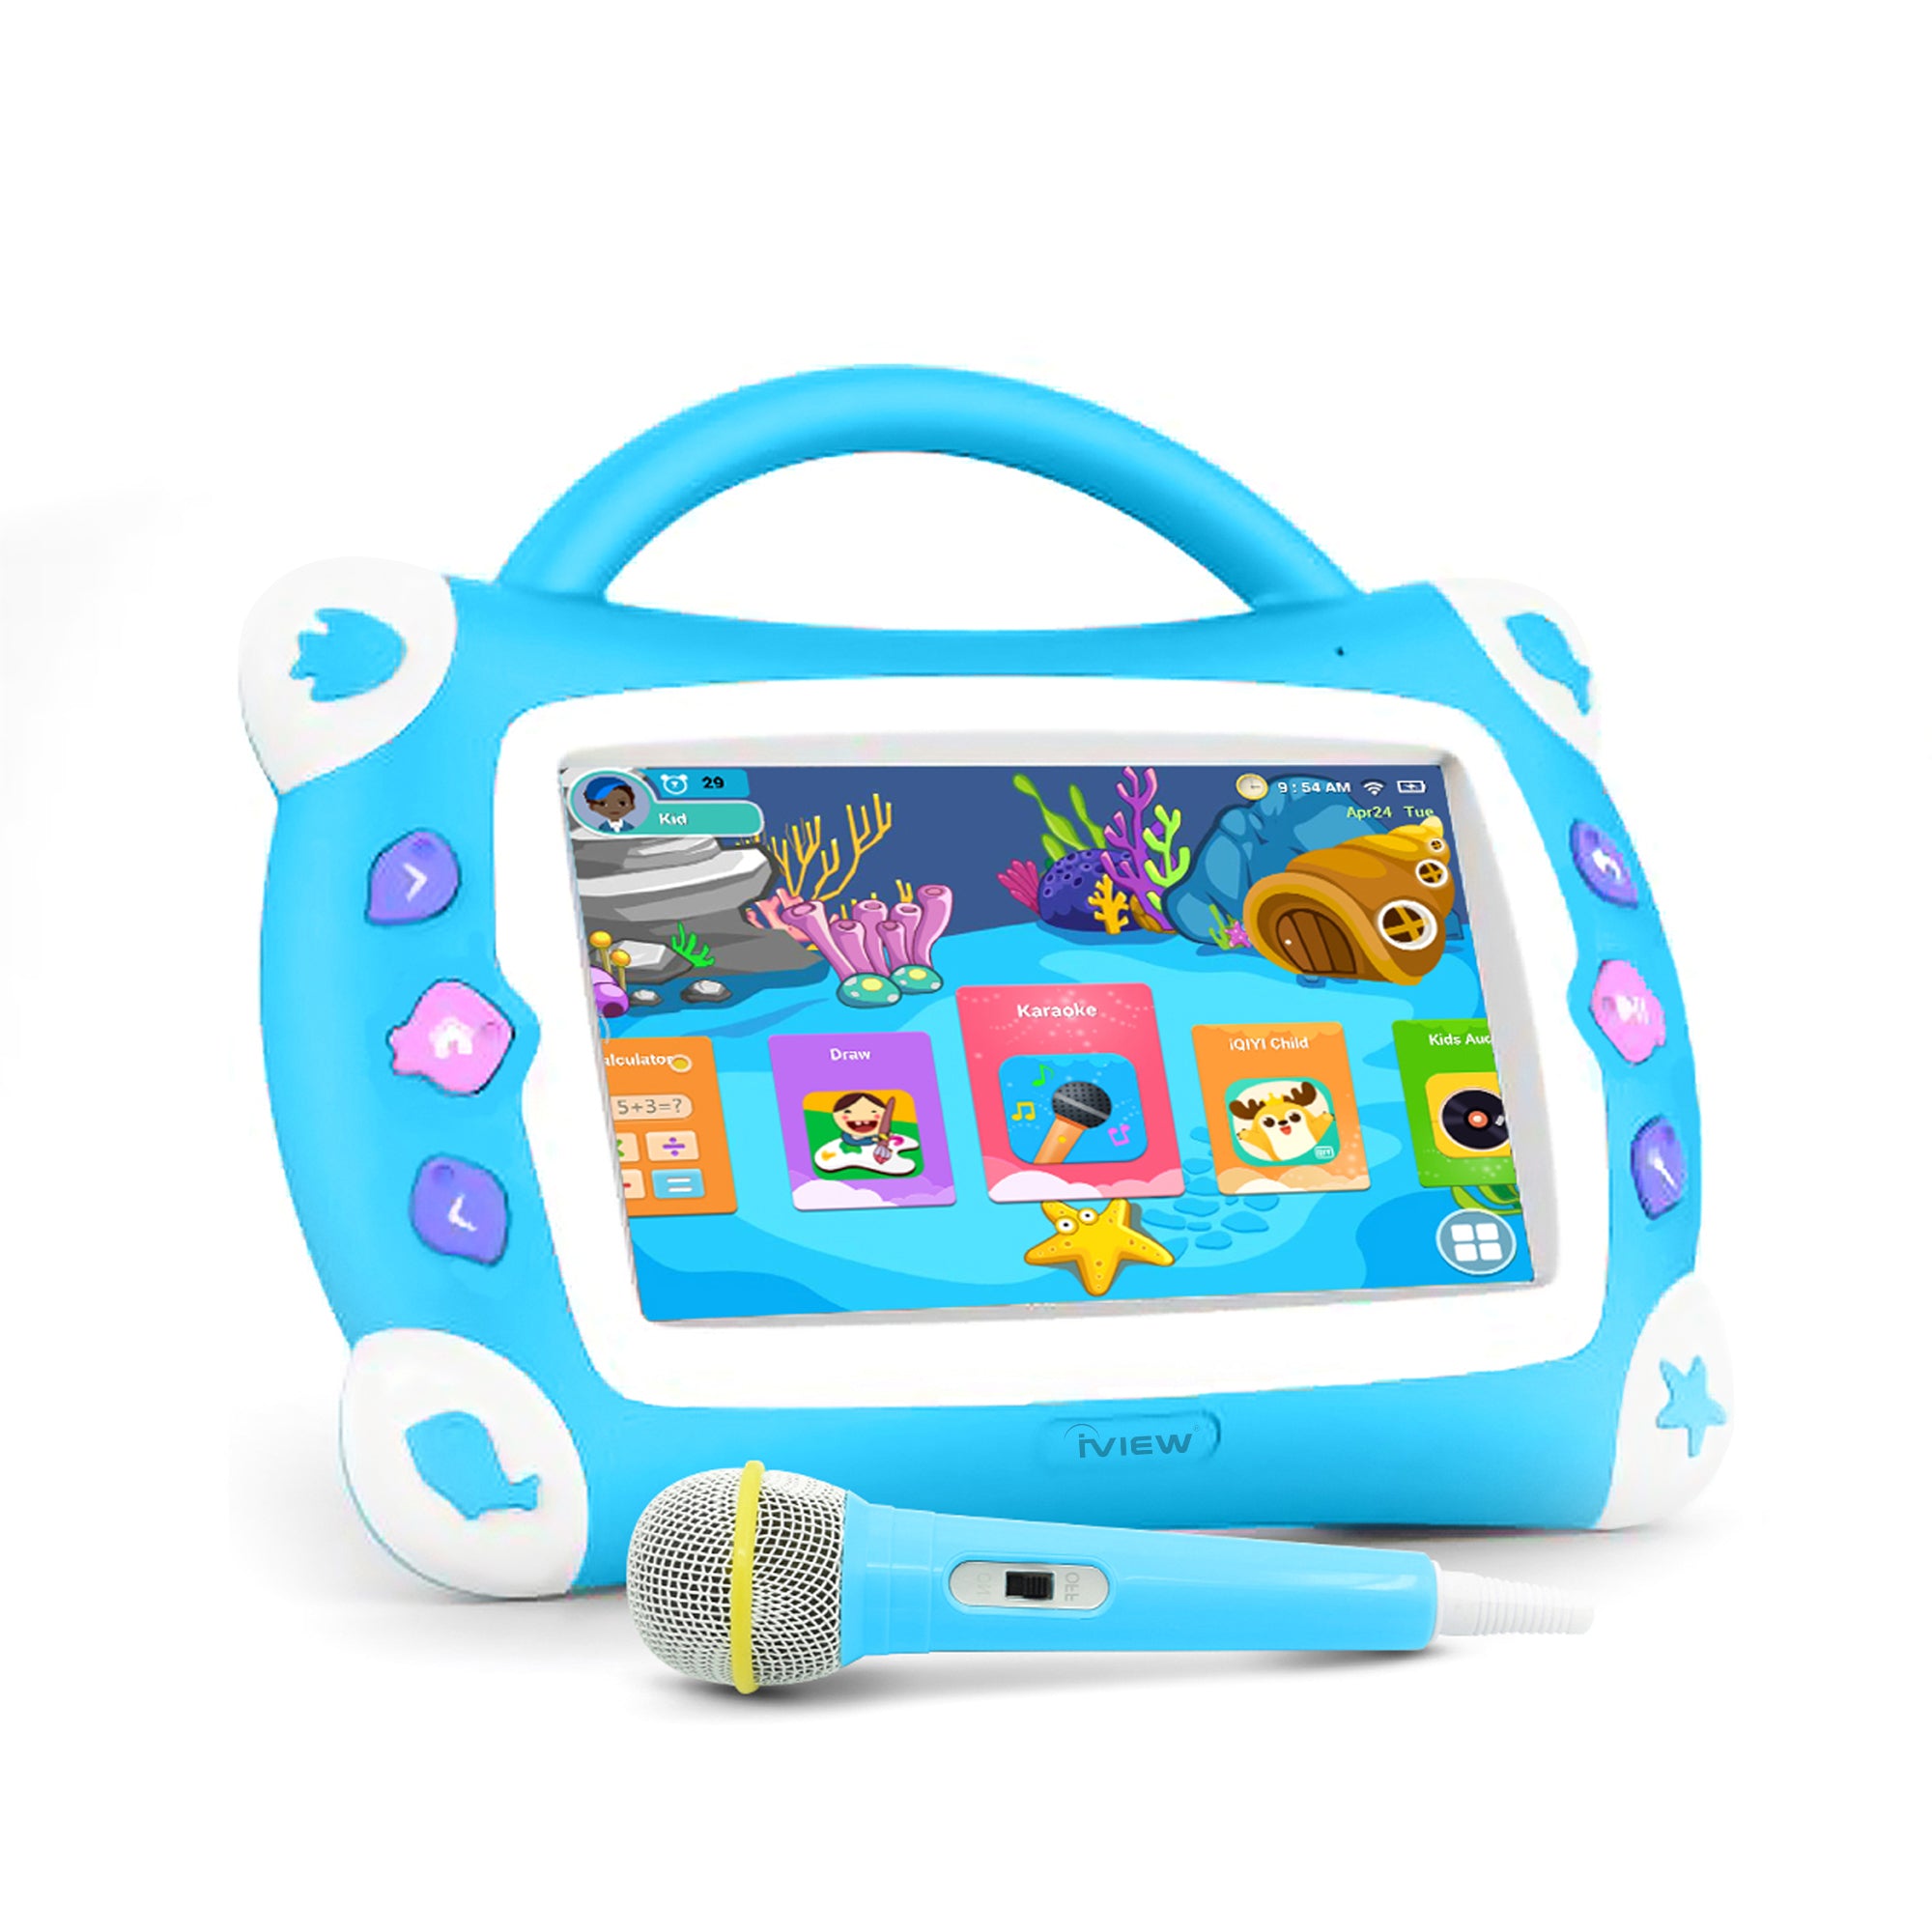 Kids Sing Pad 7" Quad Core 16GB Tablet W/ Microphone - Ships Next Business Day!